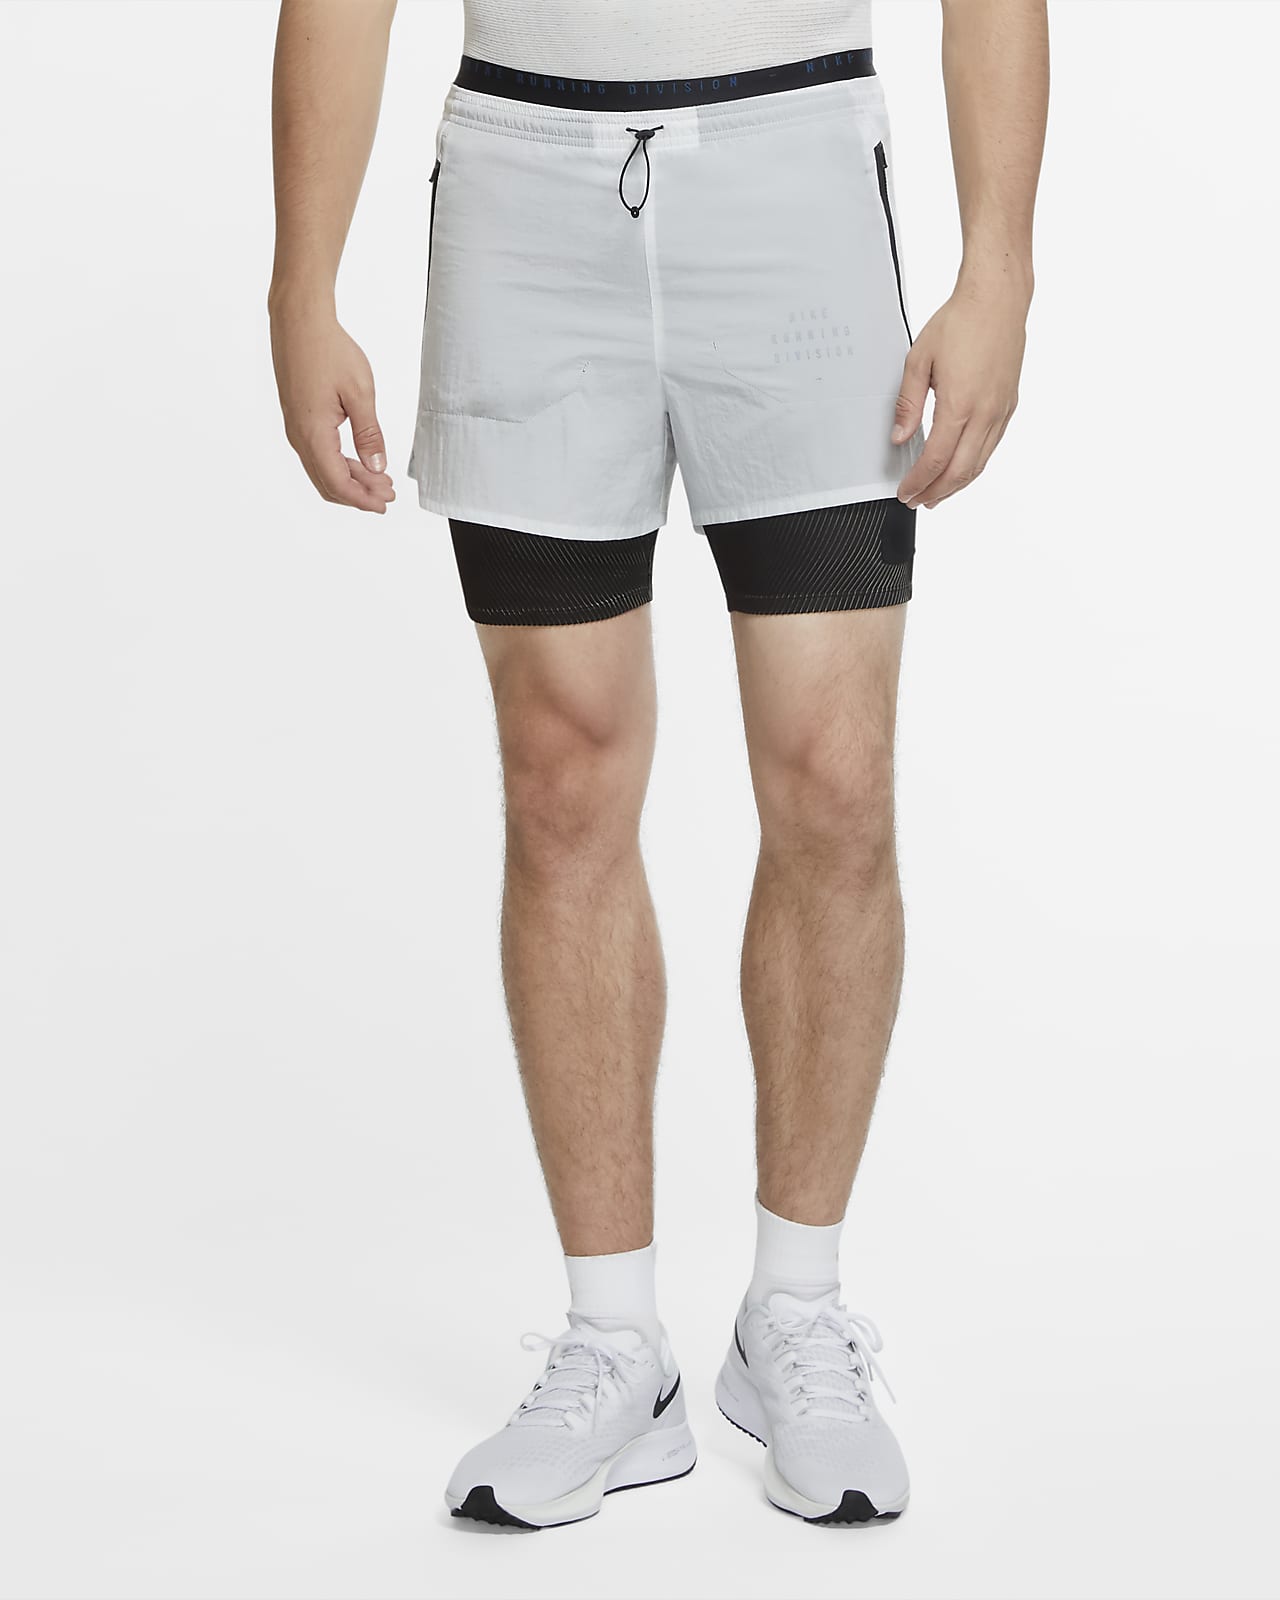 nike running shorts with built in spandex